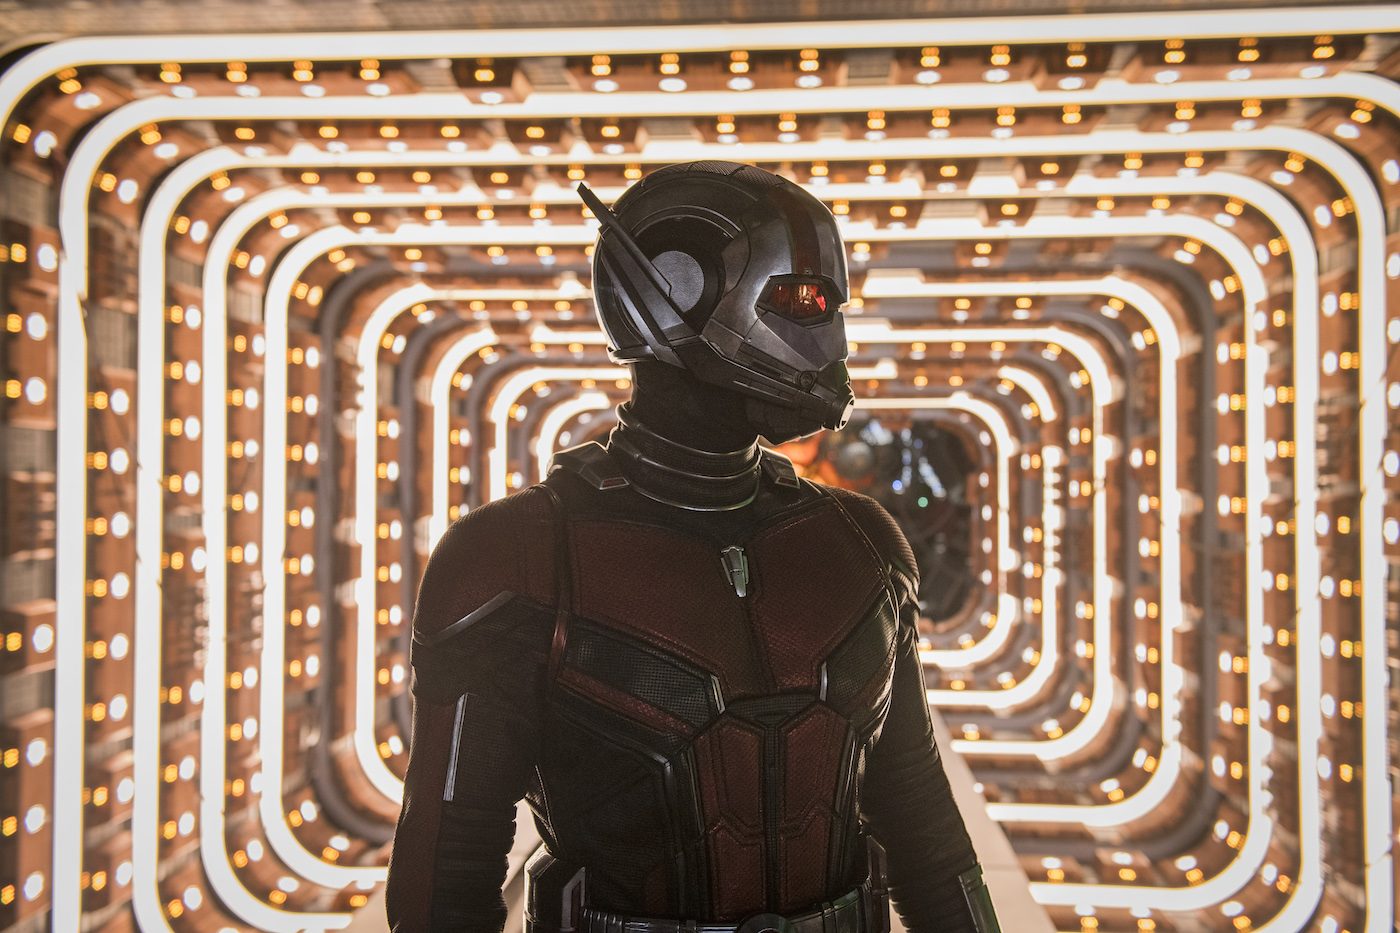 "AntMan and the Wasp Quantumania" Director Peyton Reed Shares Set